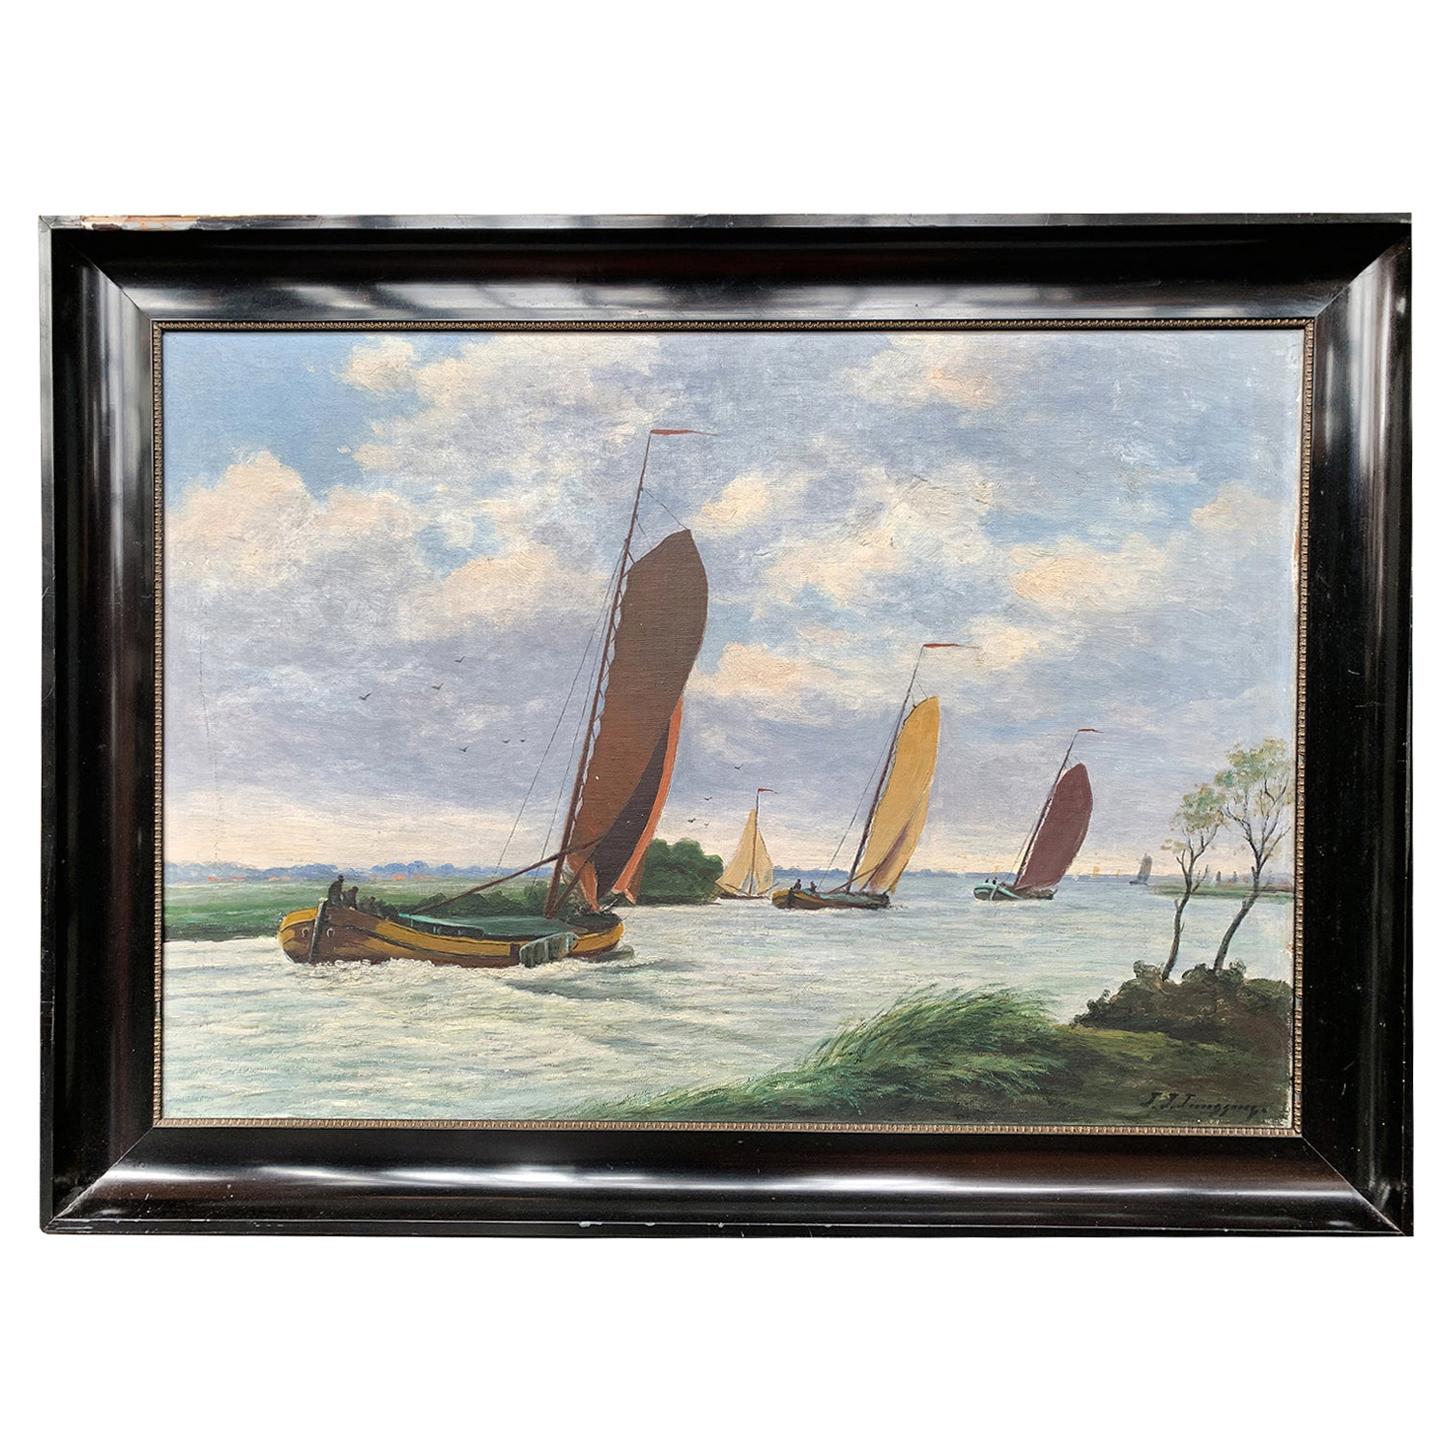 Dutch Seascape Painting with Sailboats